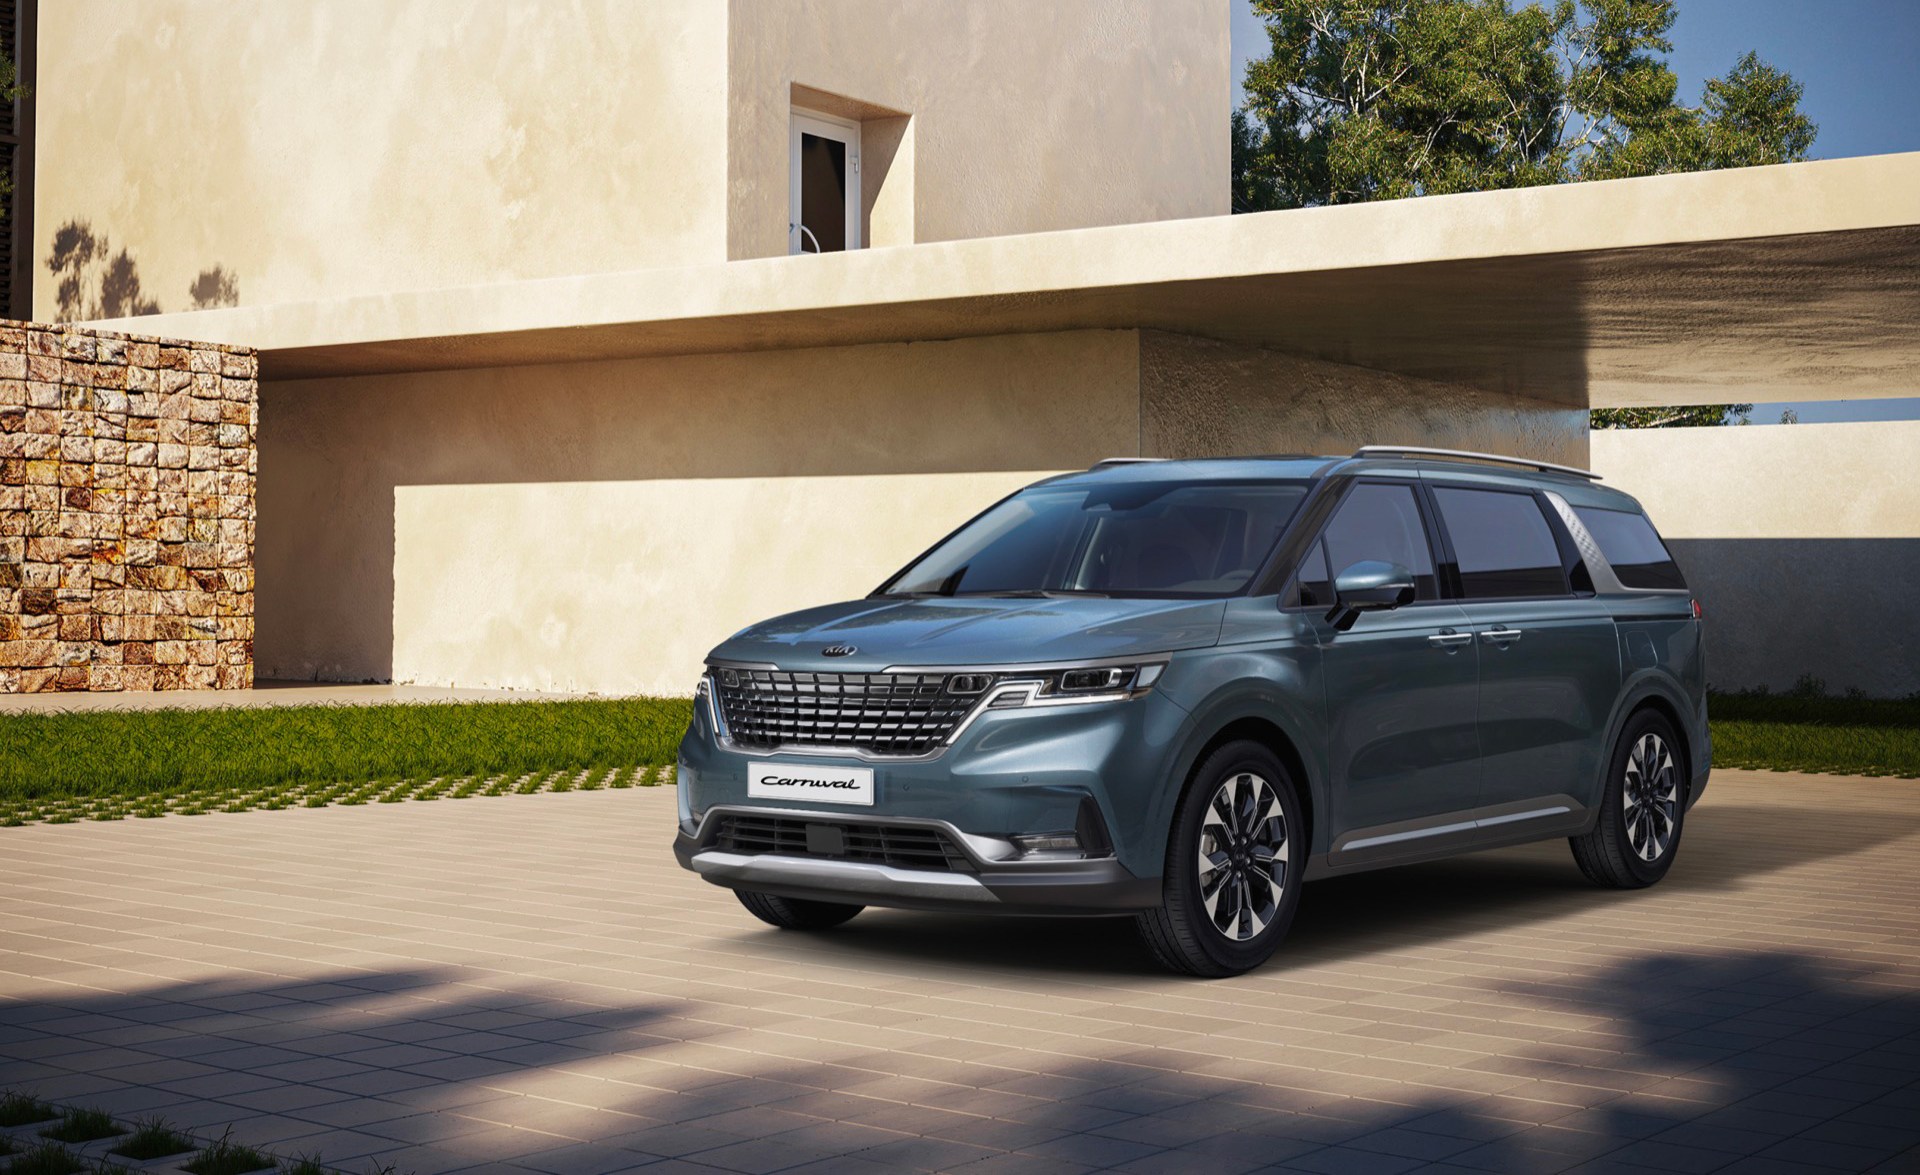 2022 Kia Sedona Shows Off Reclining 'Relaxation' Seats and Clean New Looks  » AutoGuide.com News